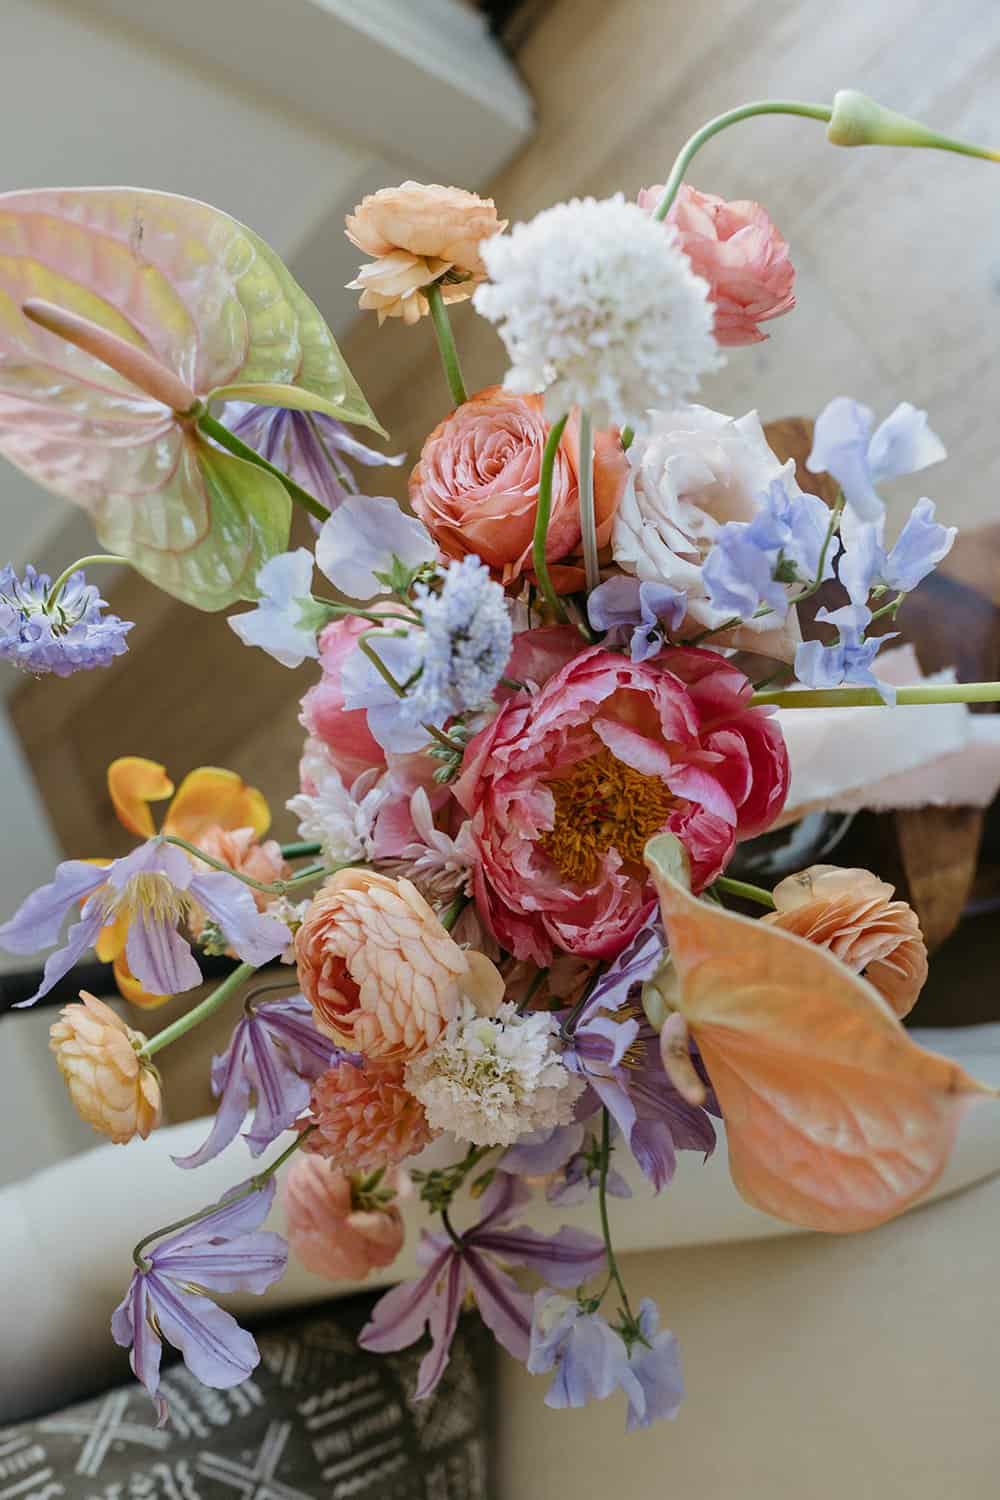 A colorful floral arrangement featuring a mix of pink peonies, orange roses, white blooms, and purple flowers, with some leaves showcasing a hint of pink, is displayed indoors.